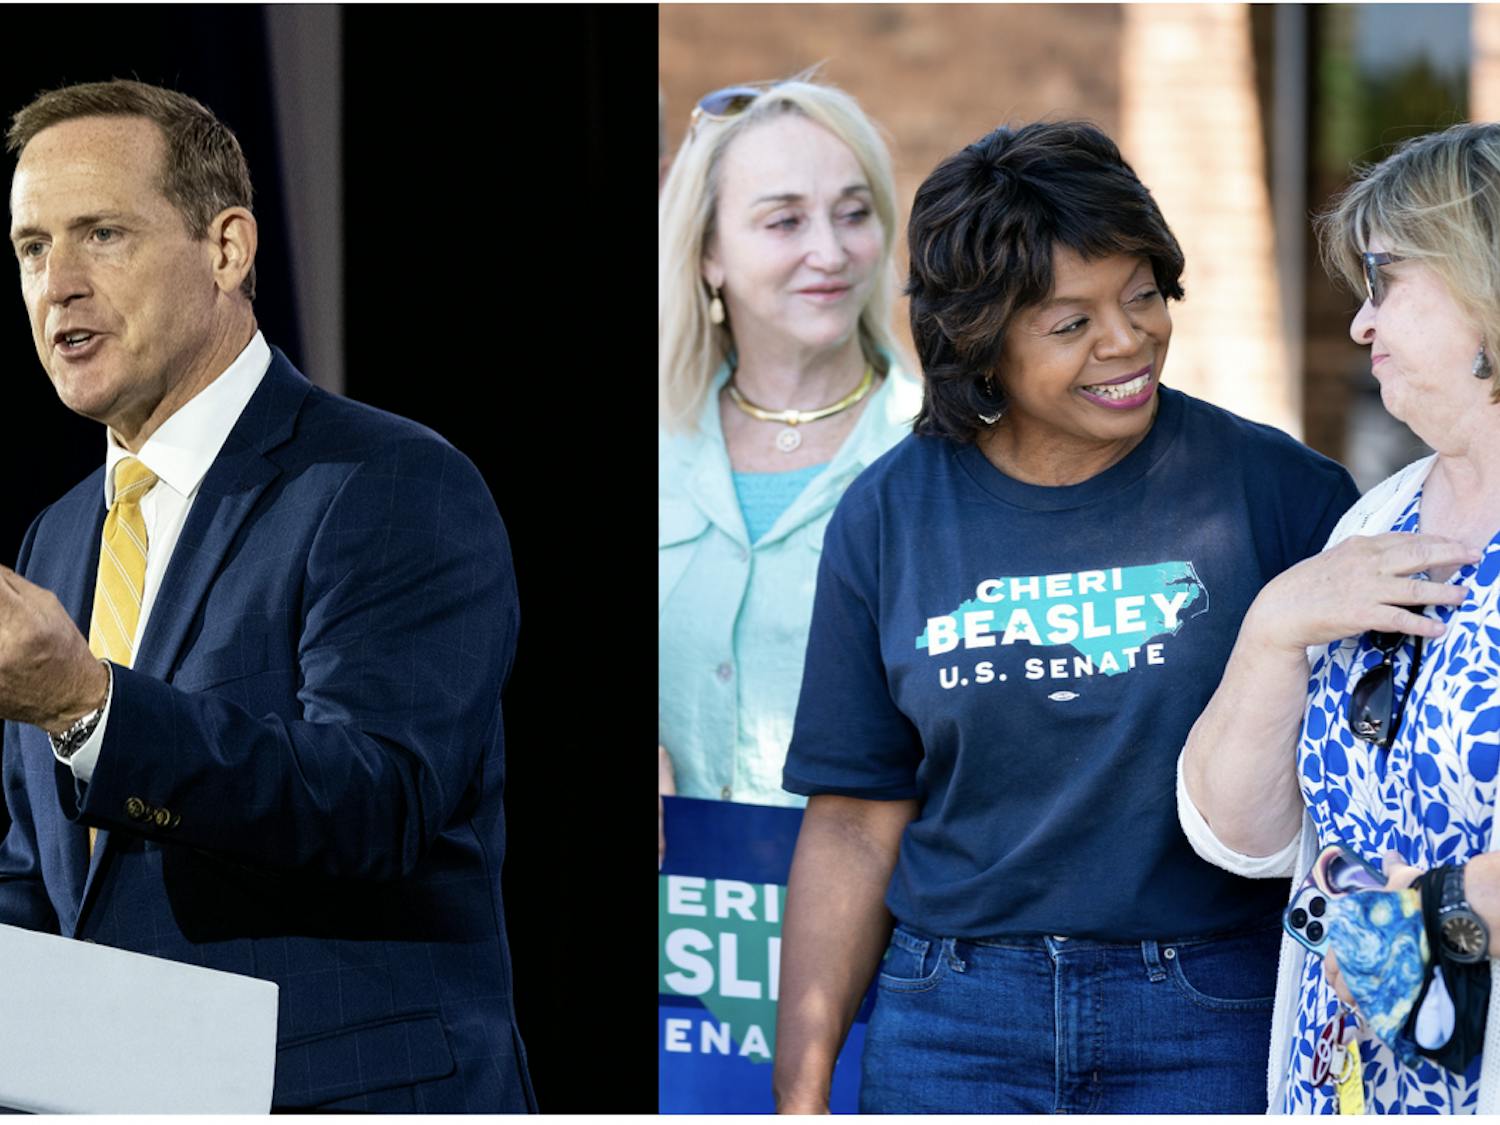 Ted Budd, pictured on left, courtesy of Seth Herald/Getty Images/TNS has won North Carolina's U.S. Senate seat, beating Cheri Beasley, pictured on right, courtesy of Sean Rayford/Getty Images/TNS. &nbsp;